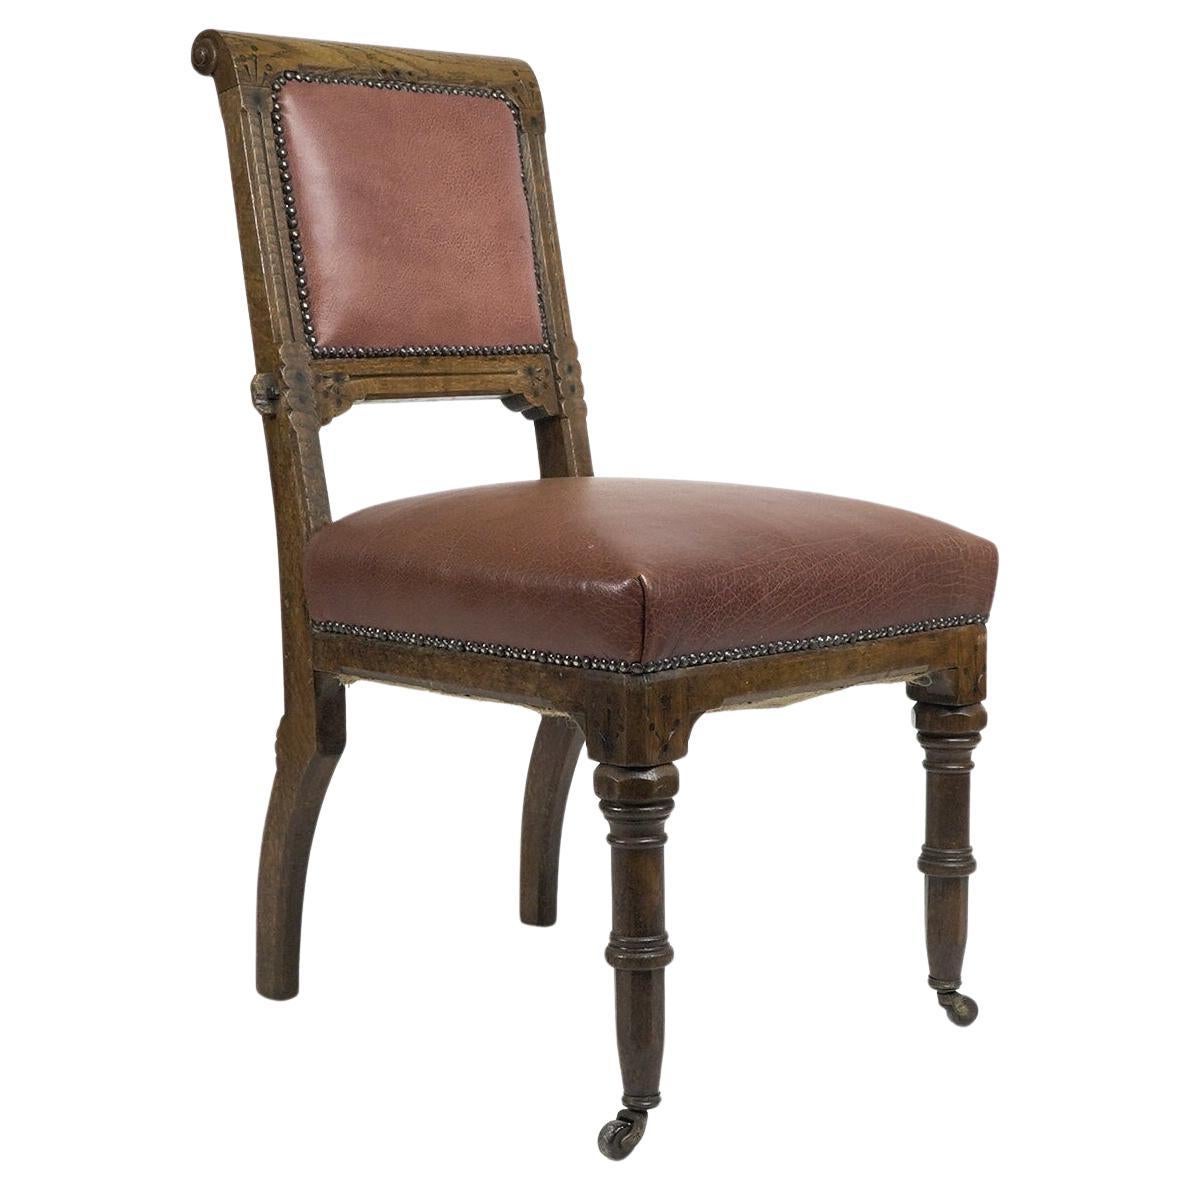 Charles Bevan attributed. A Gothic Revival side chair with scroll carvings